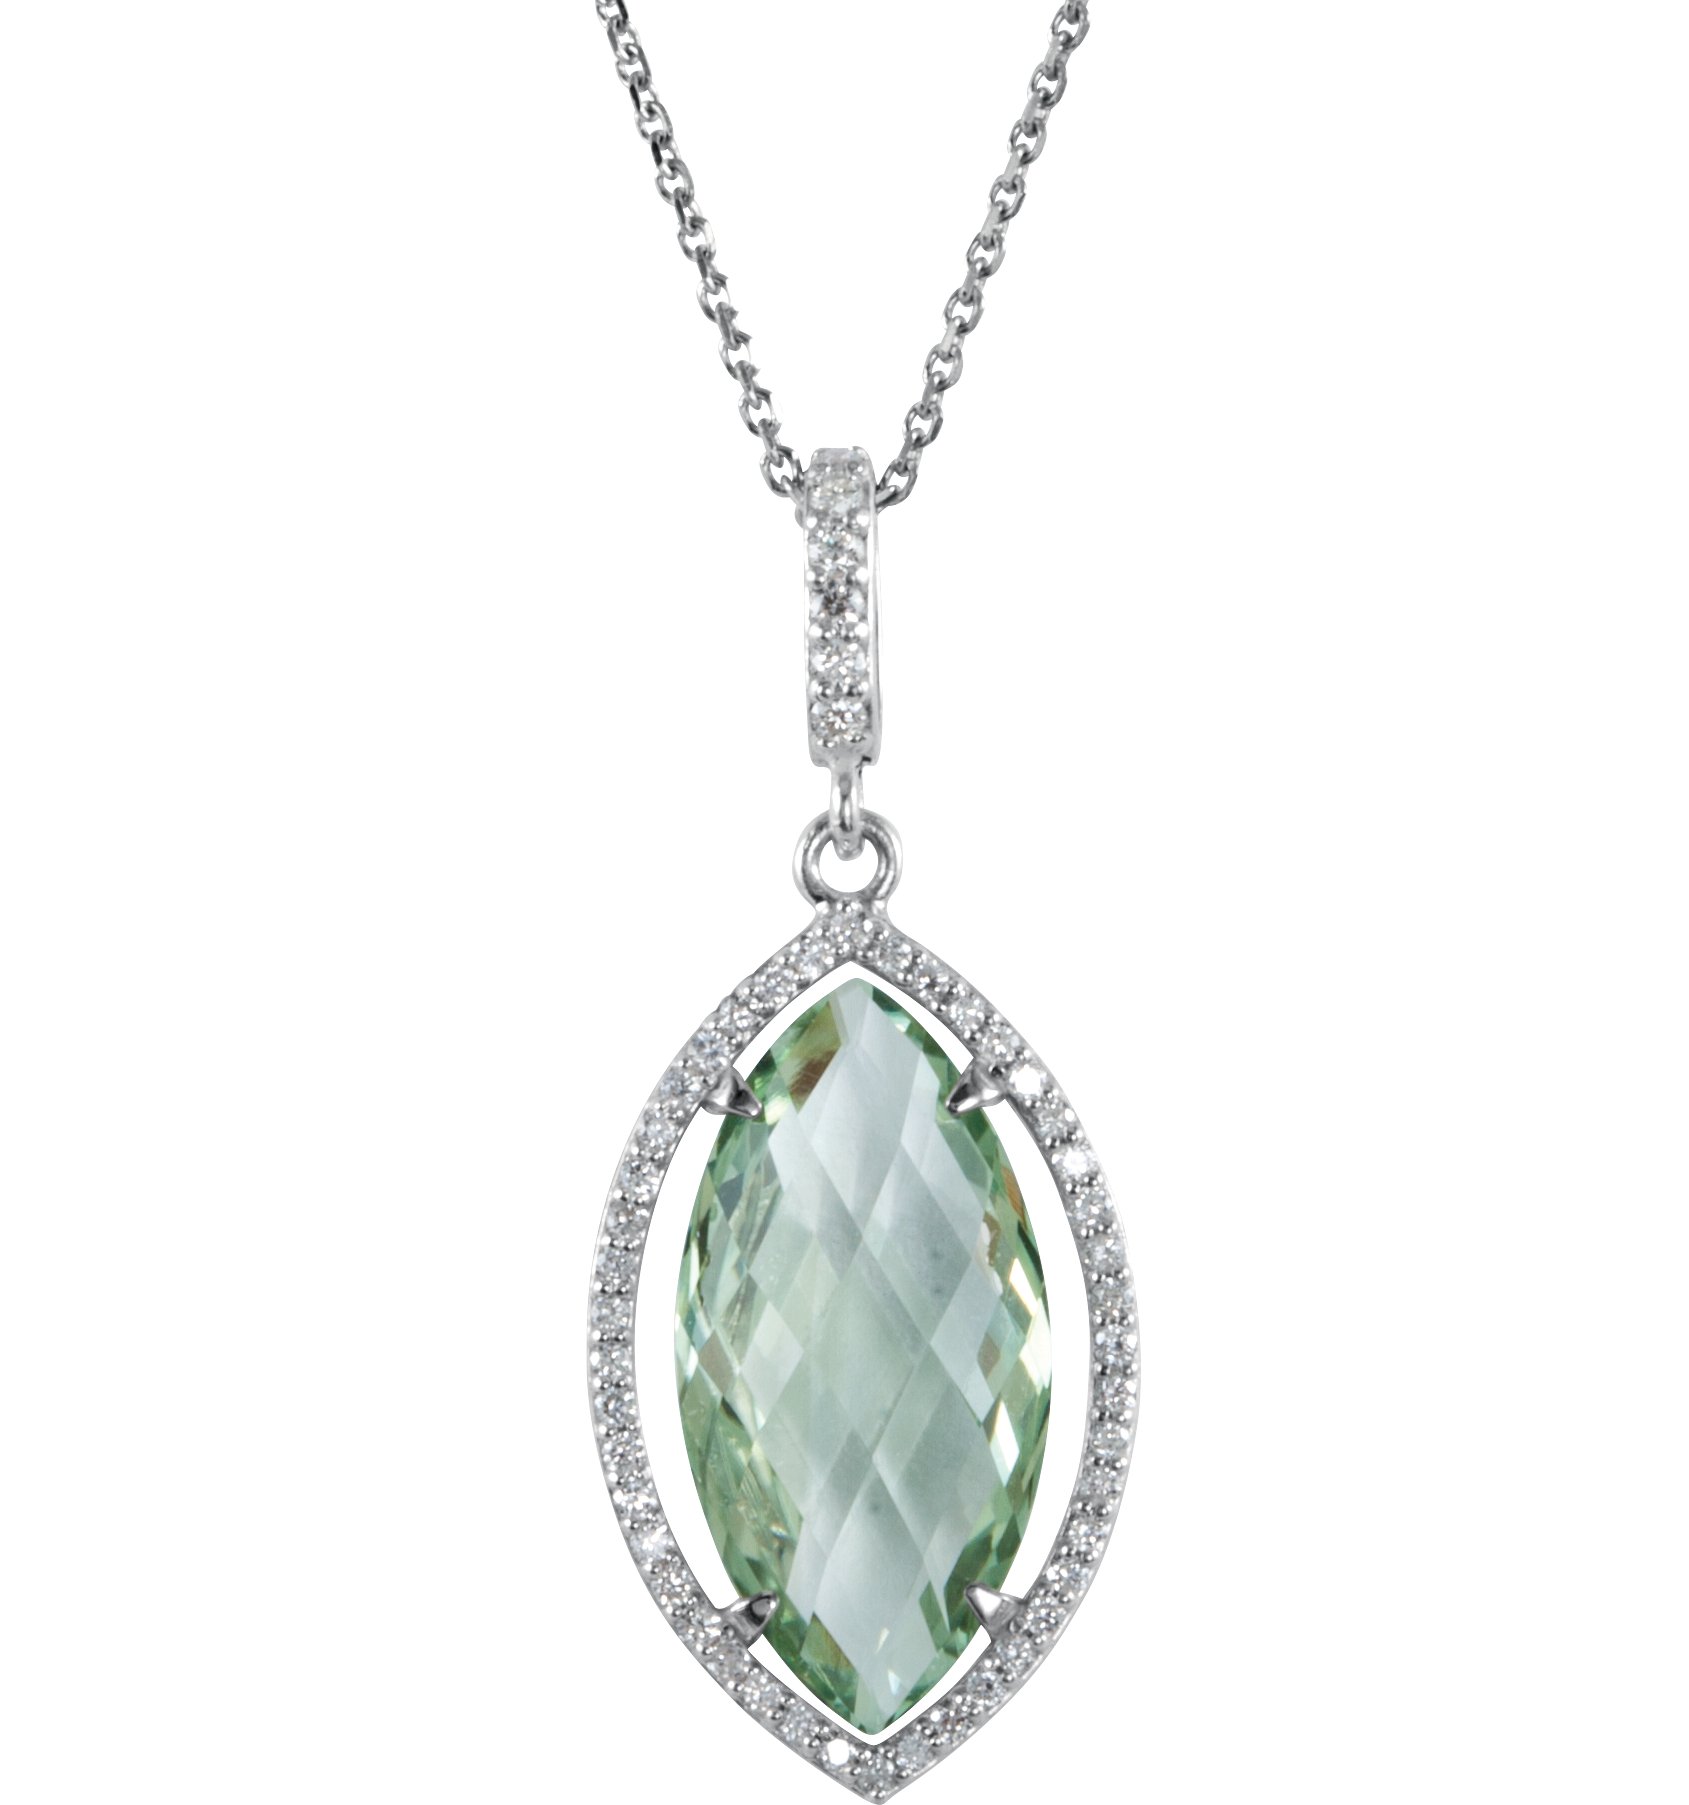 Halo-Styled Marquise-Shaped Dangle Pendant or Necklace